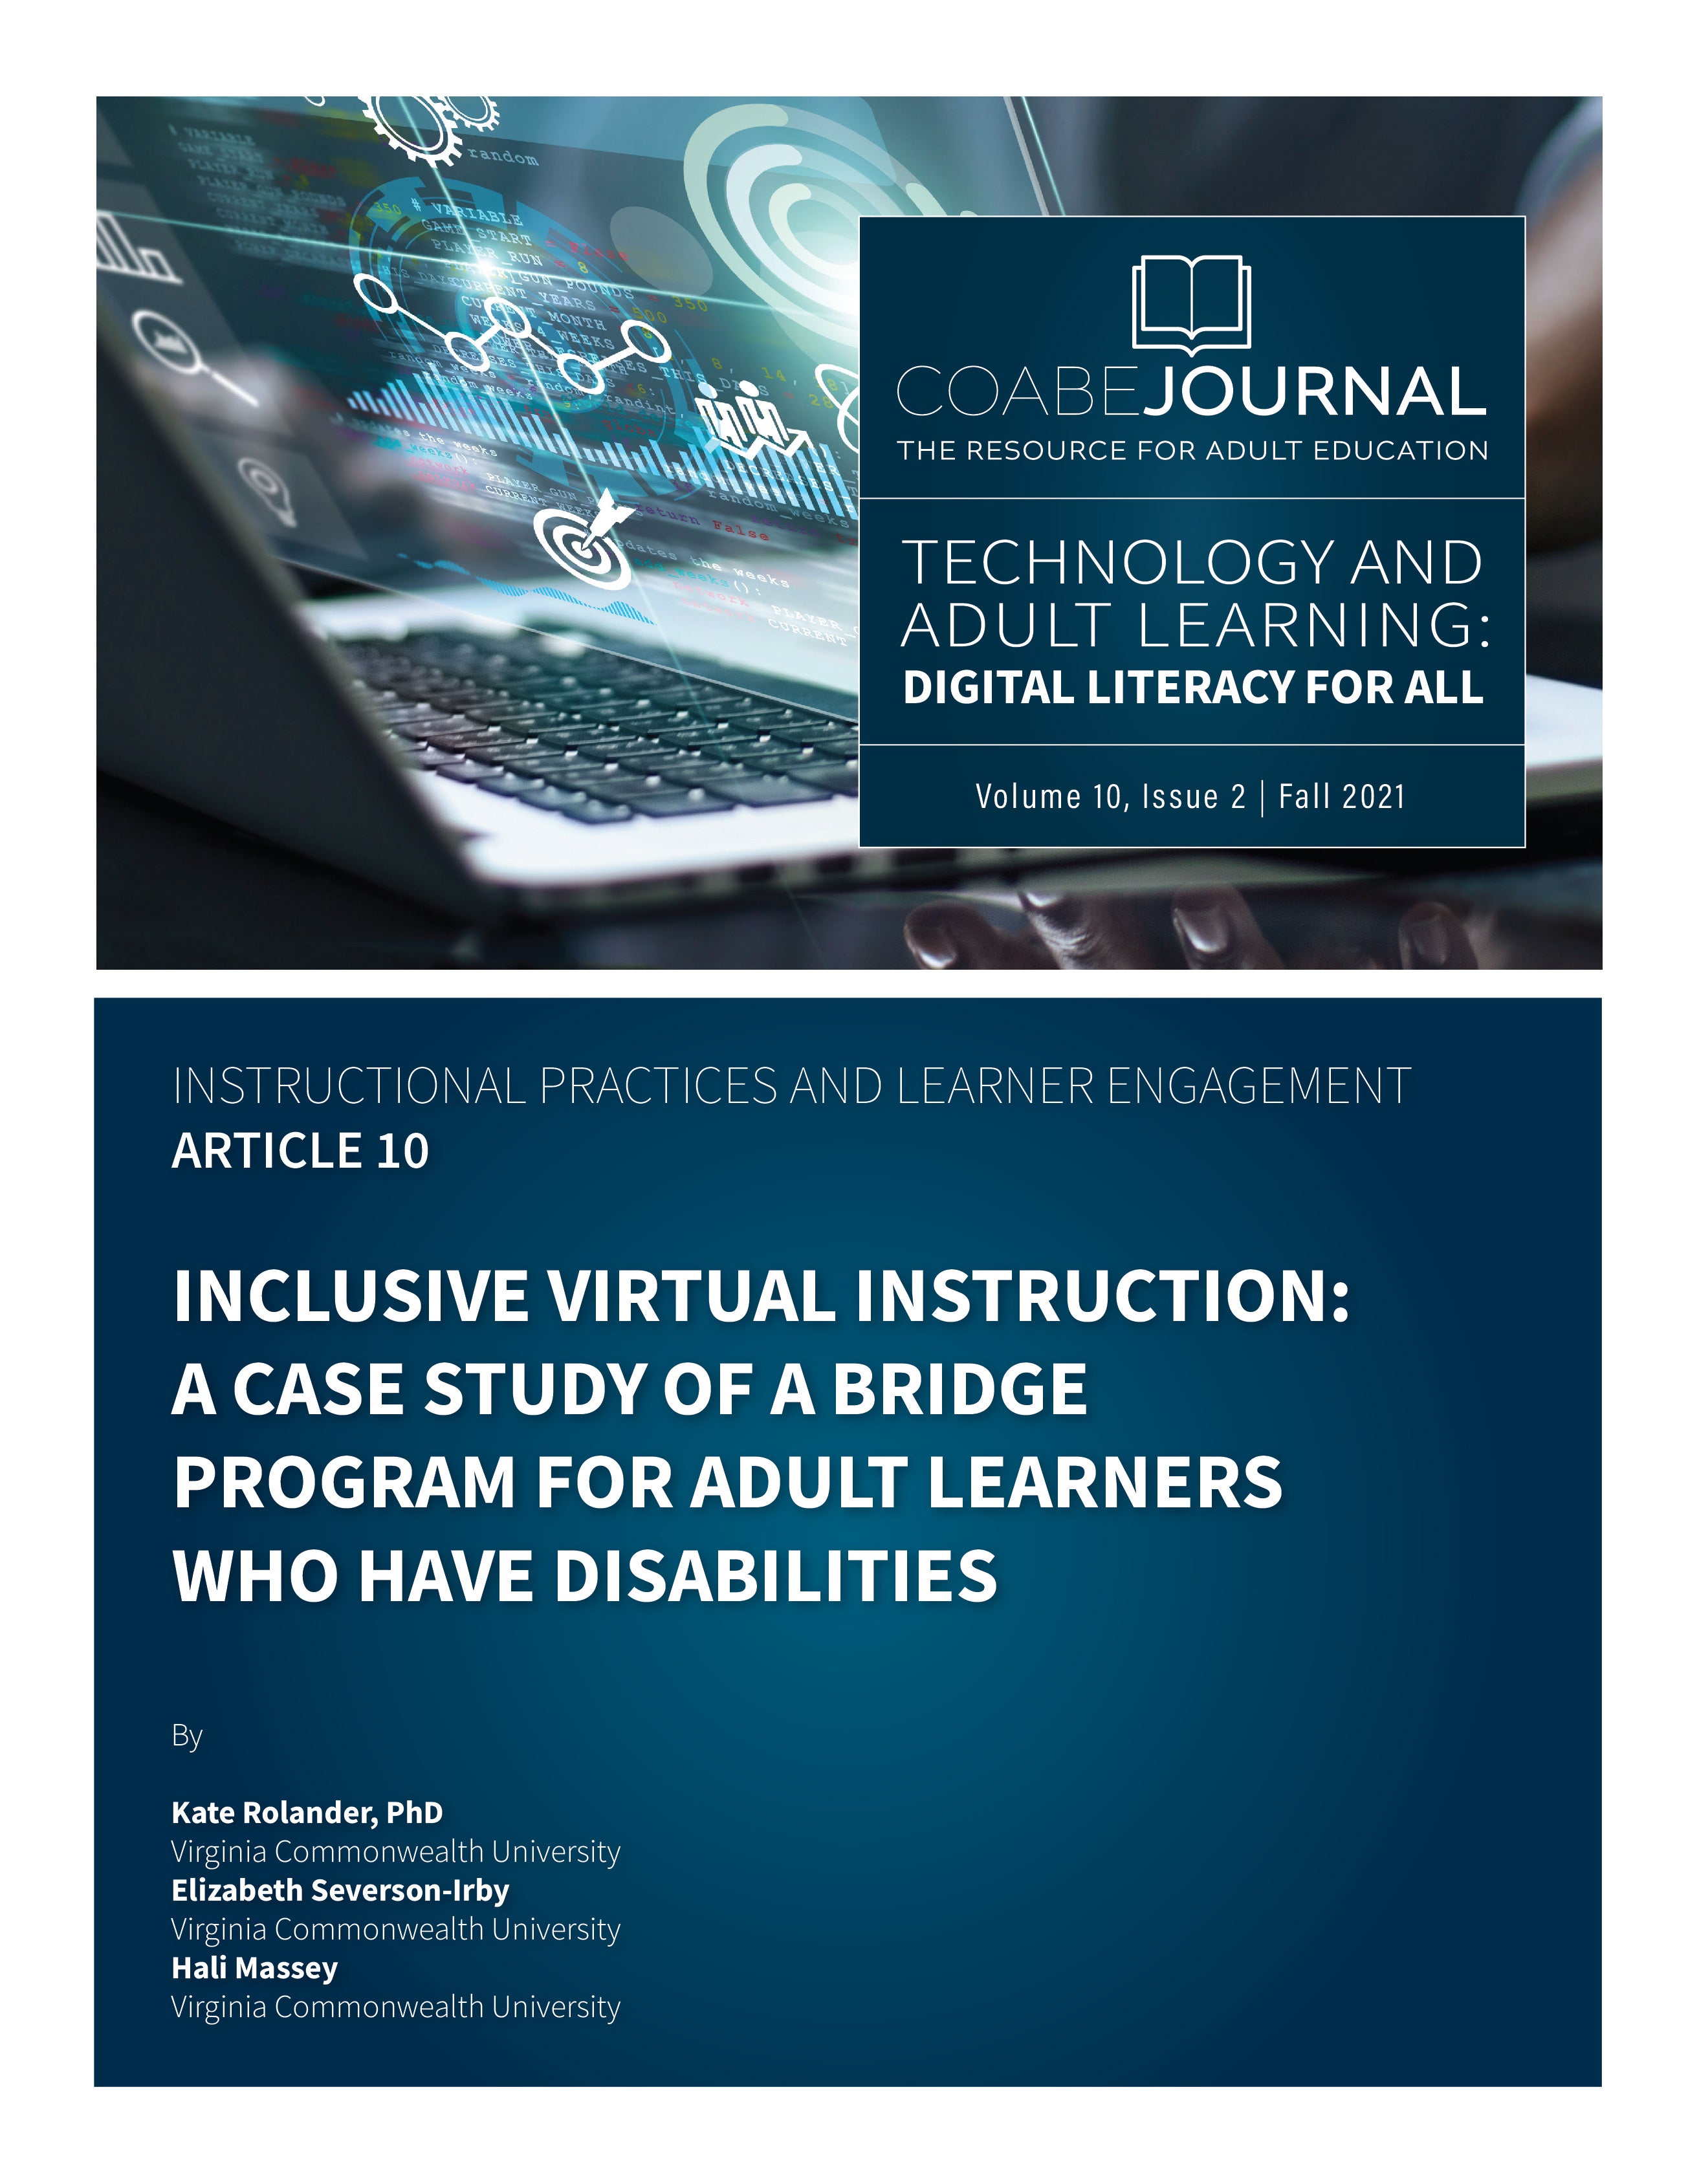 Article 10 | Inclusive Virtual Instruction: A Case Study Of A Bridge Program For Adult Learners Who Have Disabilities